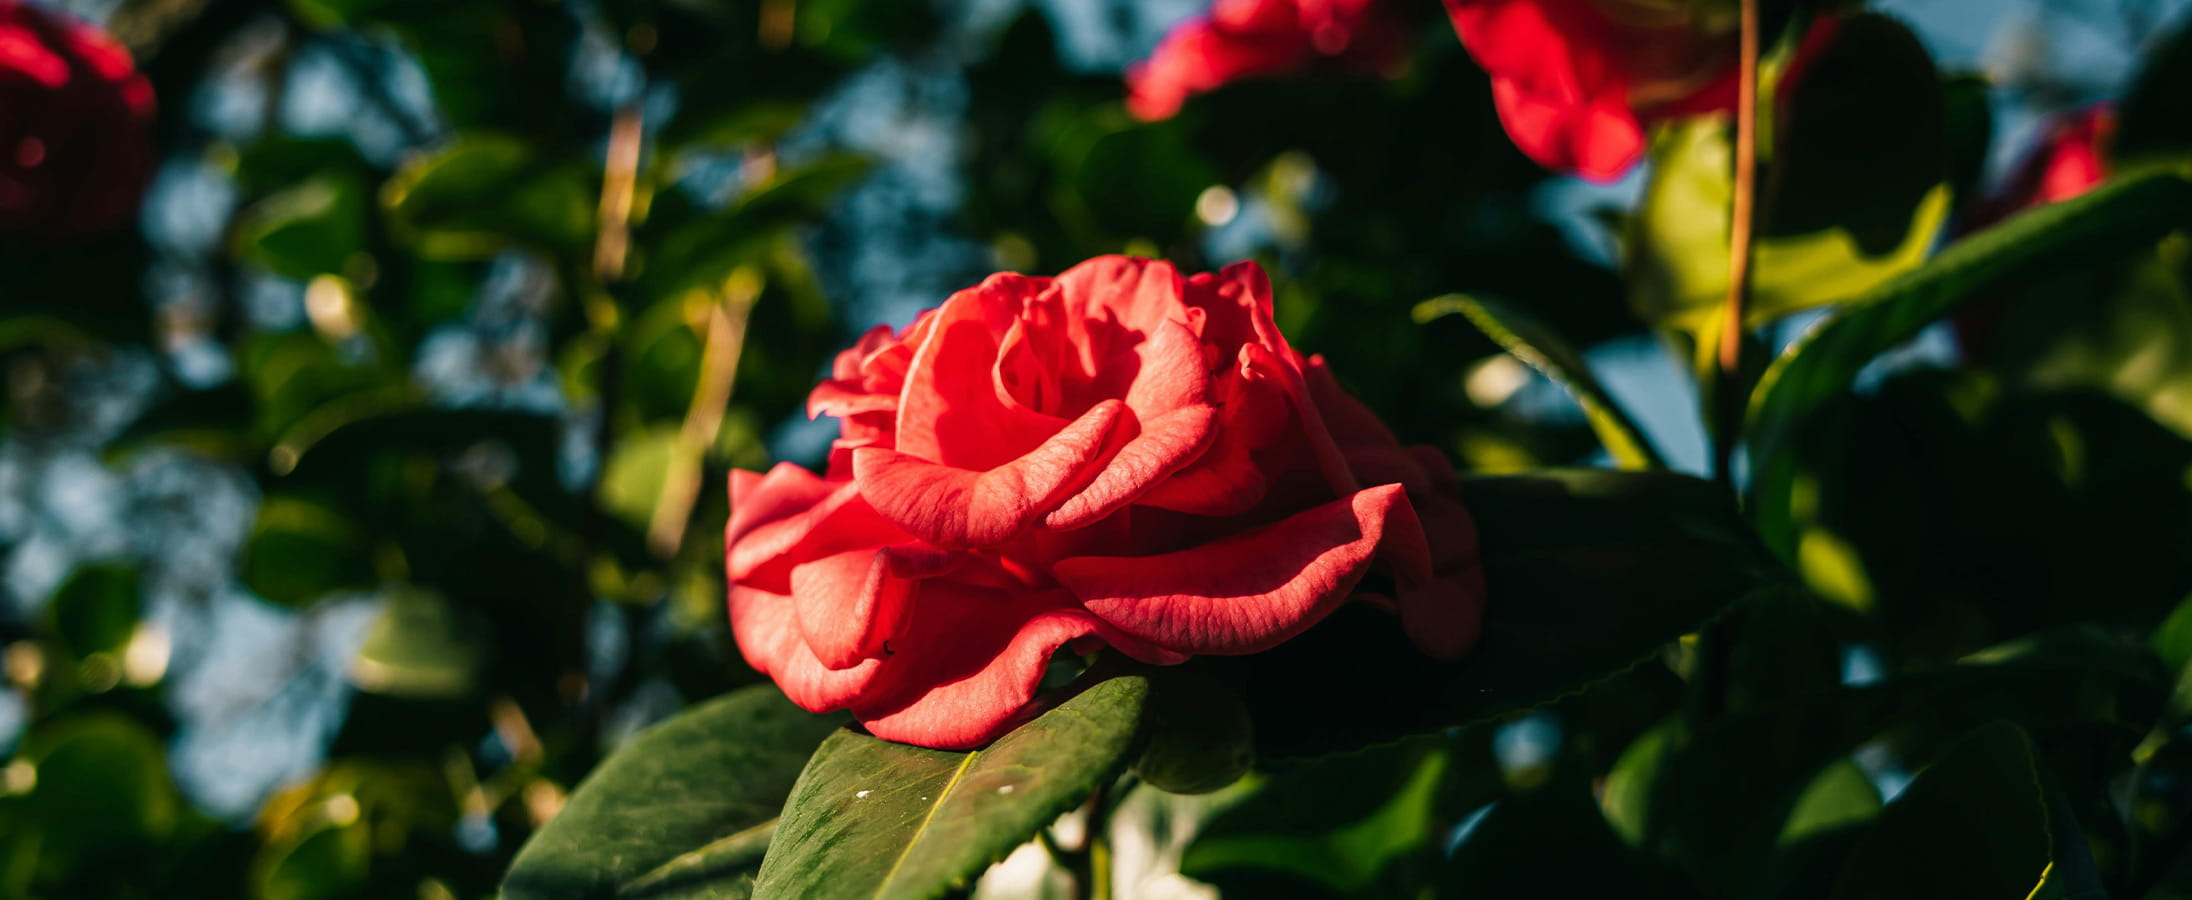 A red camellia flower used in beauty treatments